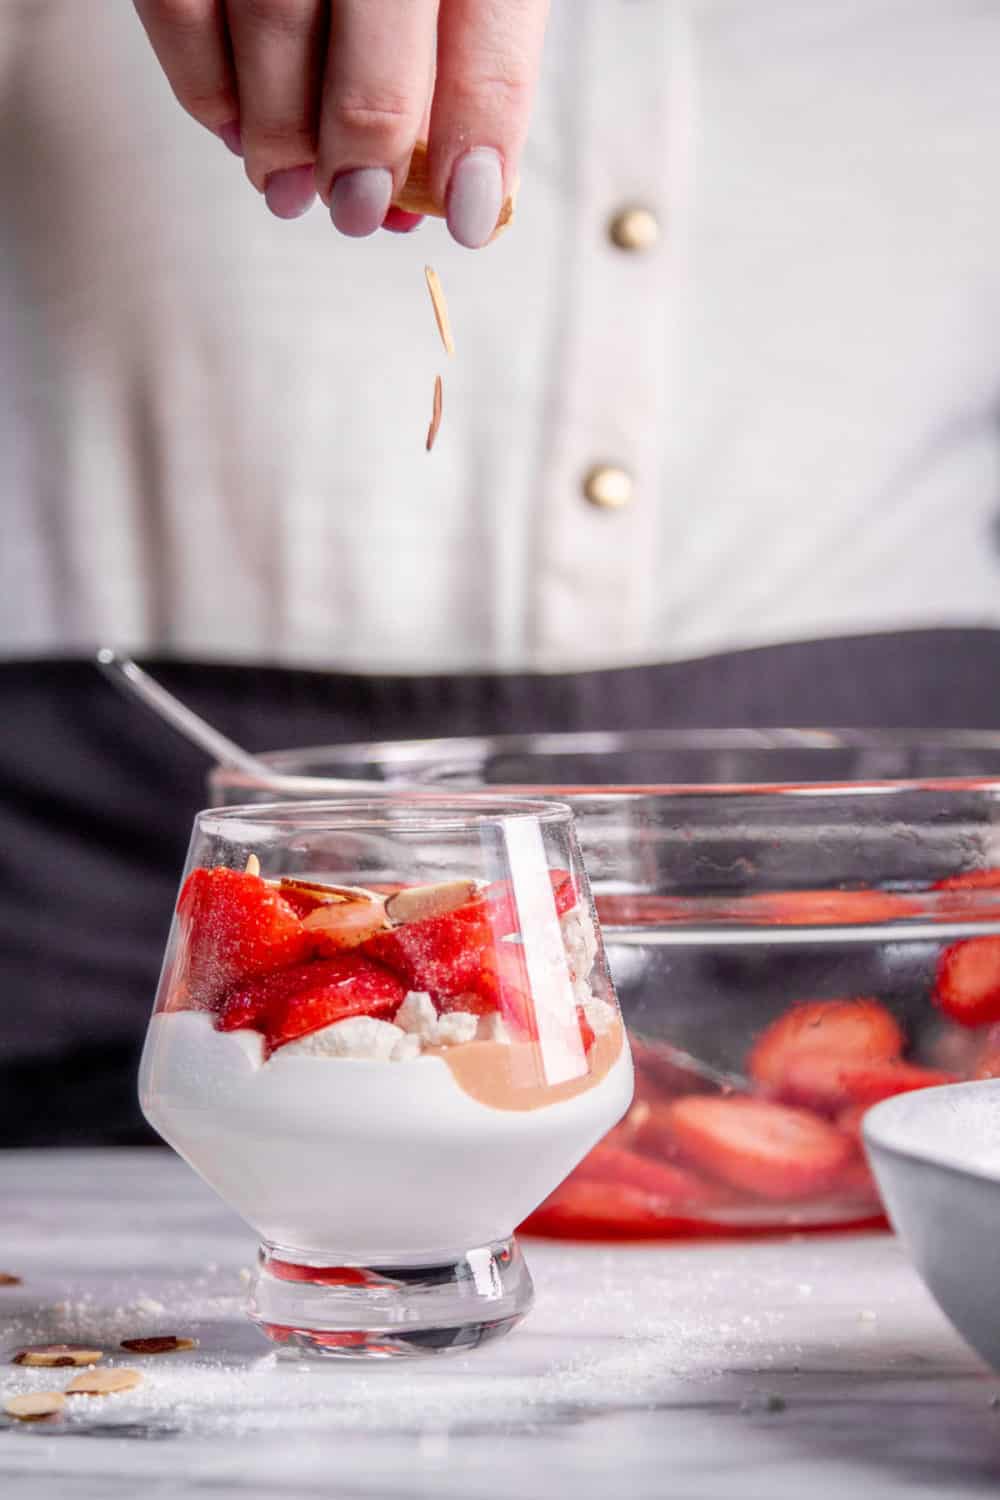 Adding toasted almonds into a glass with whipped cream, strawberry curd, meringues, and fresh strawberries.